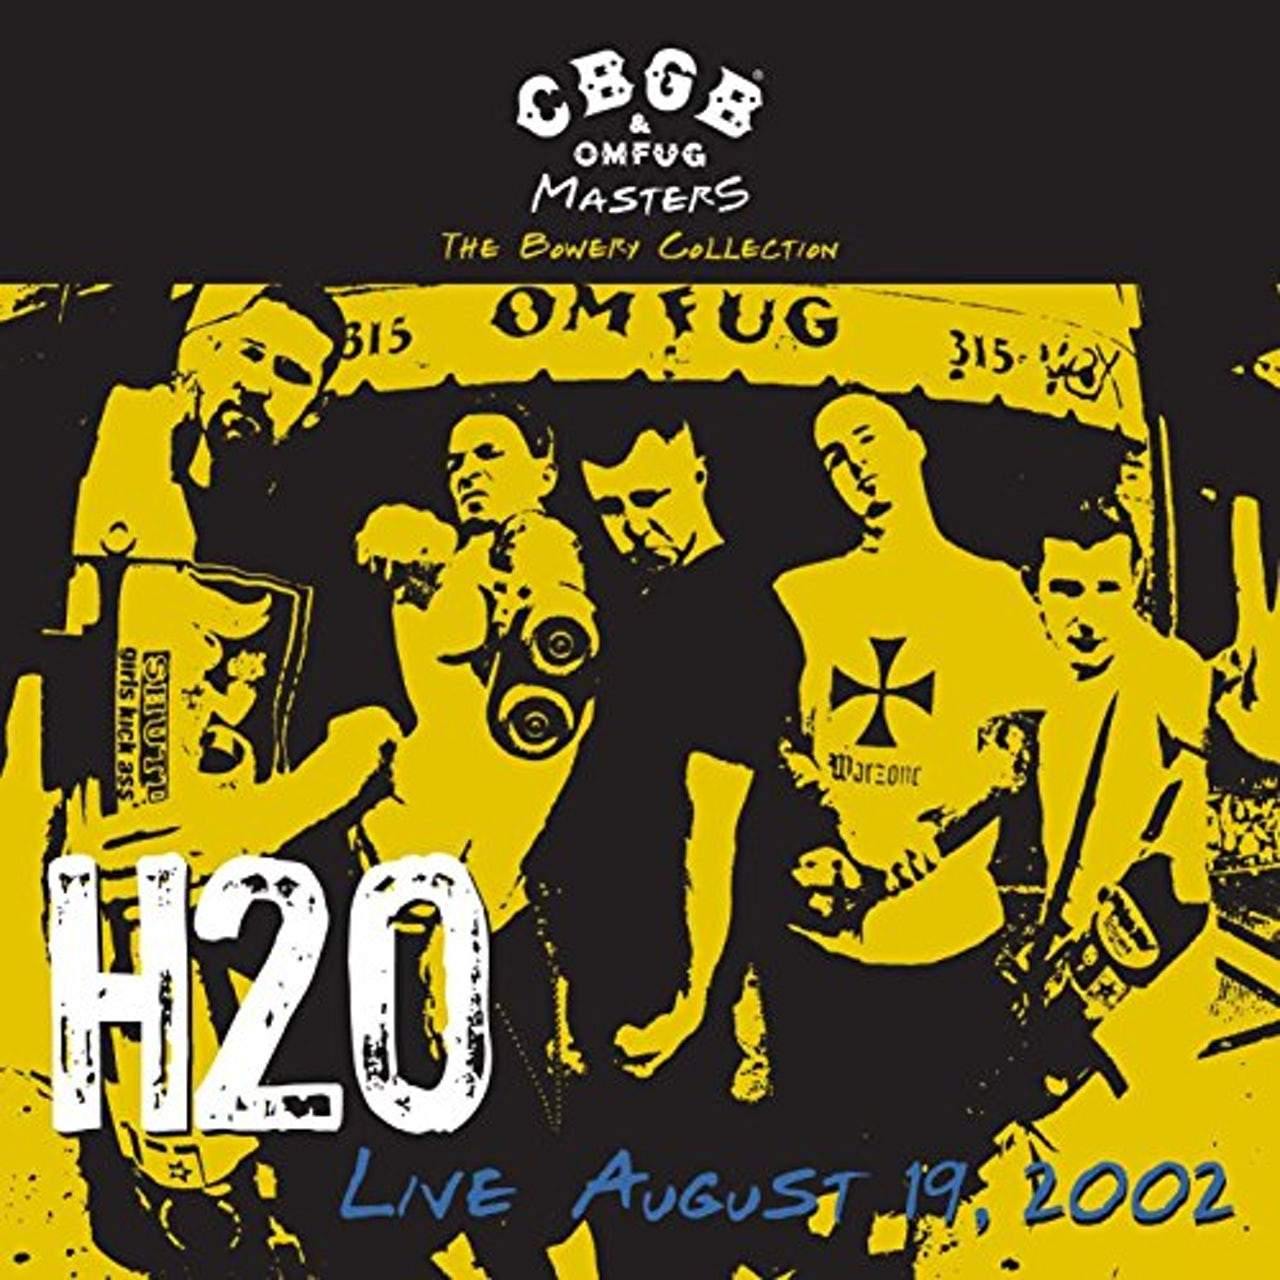 Buy – H2O "CBGB OMFUG Masters: The Bowery Collection Live August 19, 2002" 12" – Band & Music Merch – Cold Cuts Merch